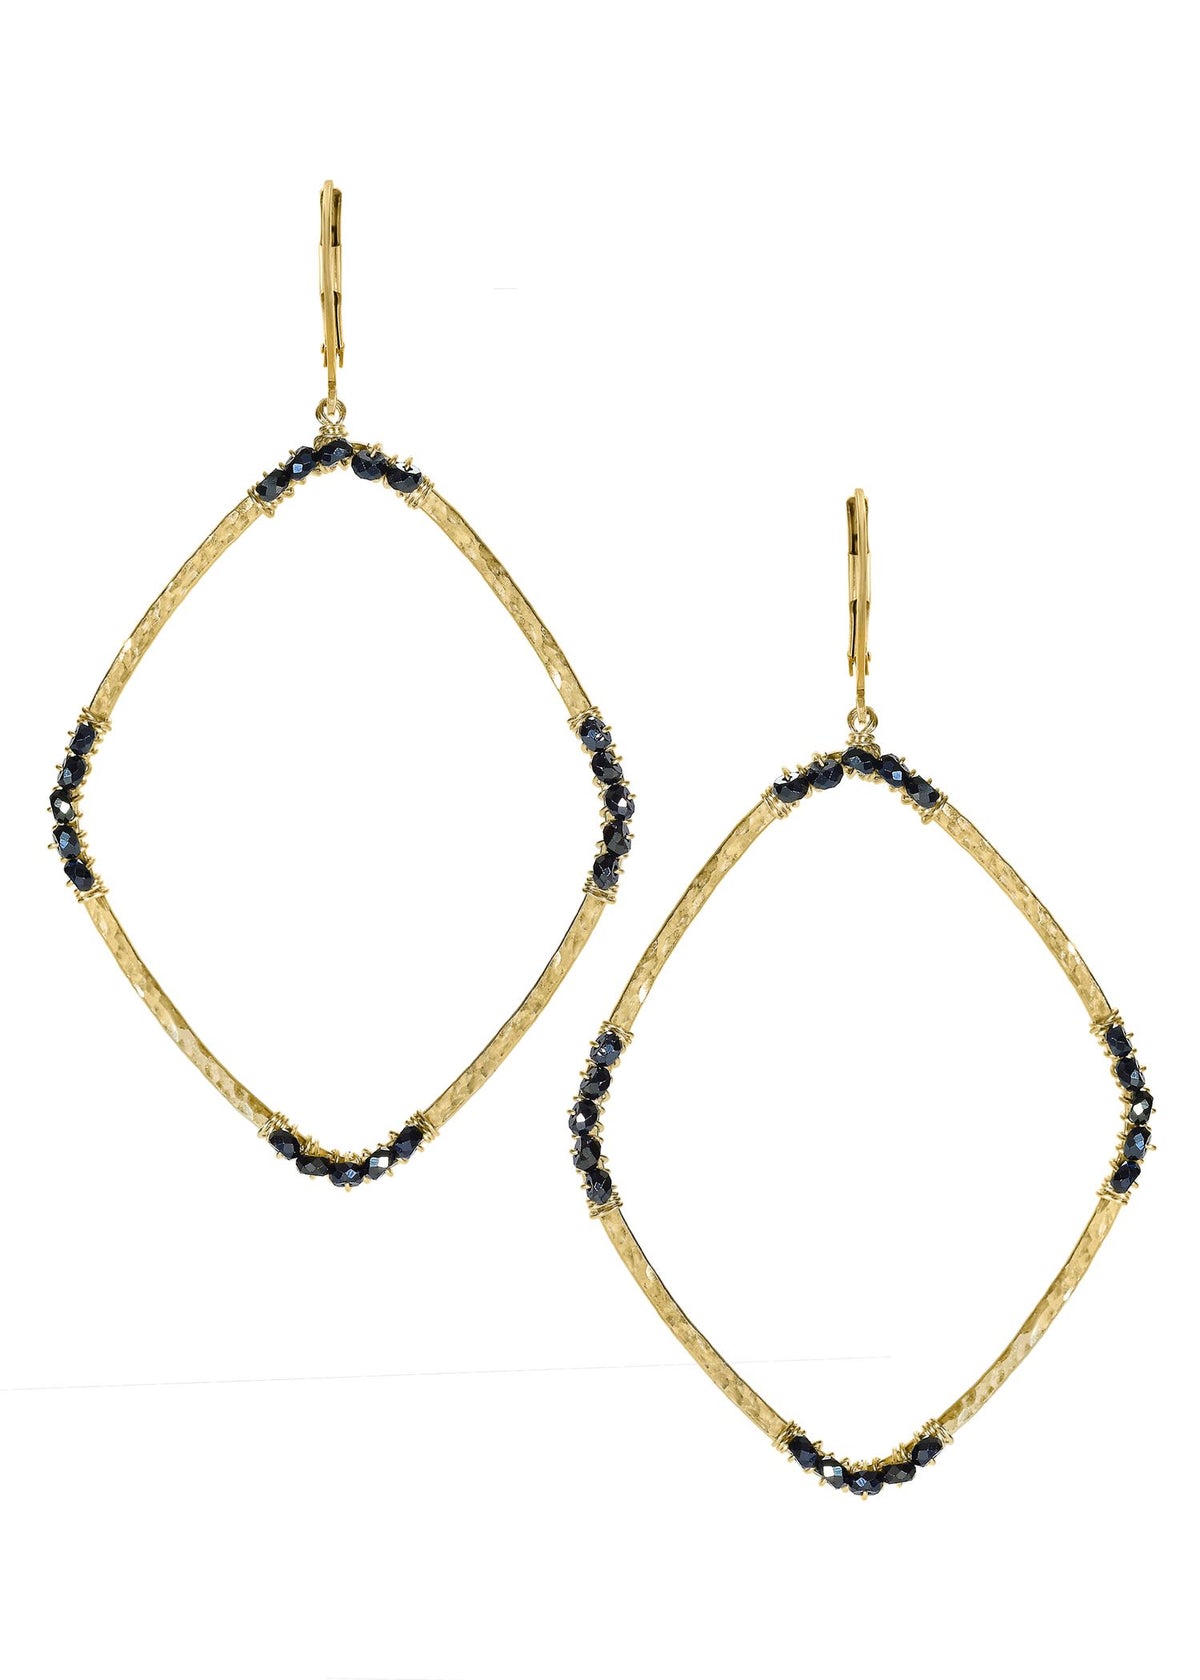 Black spinel 14k gold fill Earrings measure 2-1/2&quot; in length (including the levers) and 1-3/8&quot; in width Handmade in our Los Angeles studio